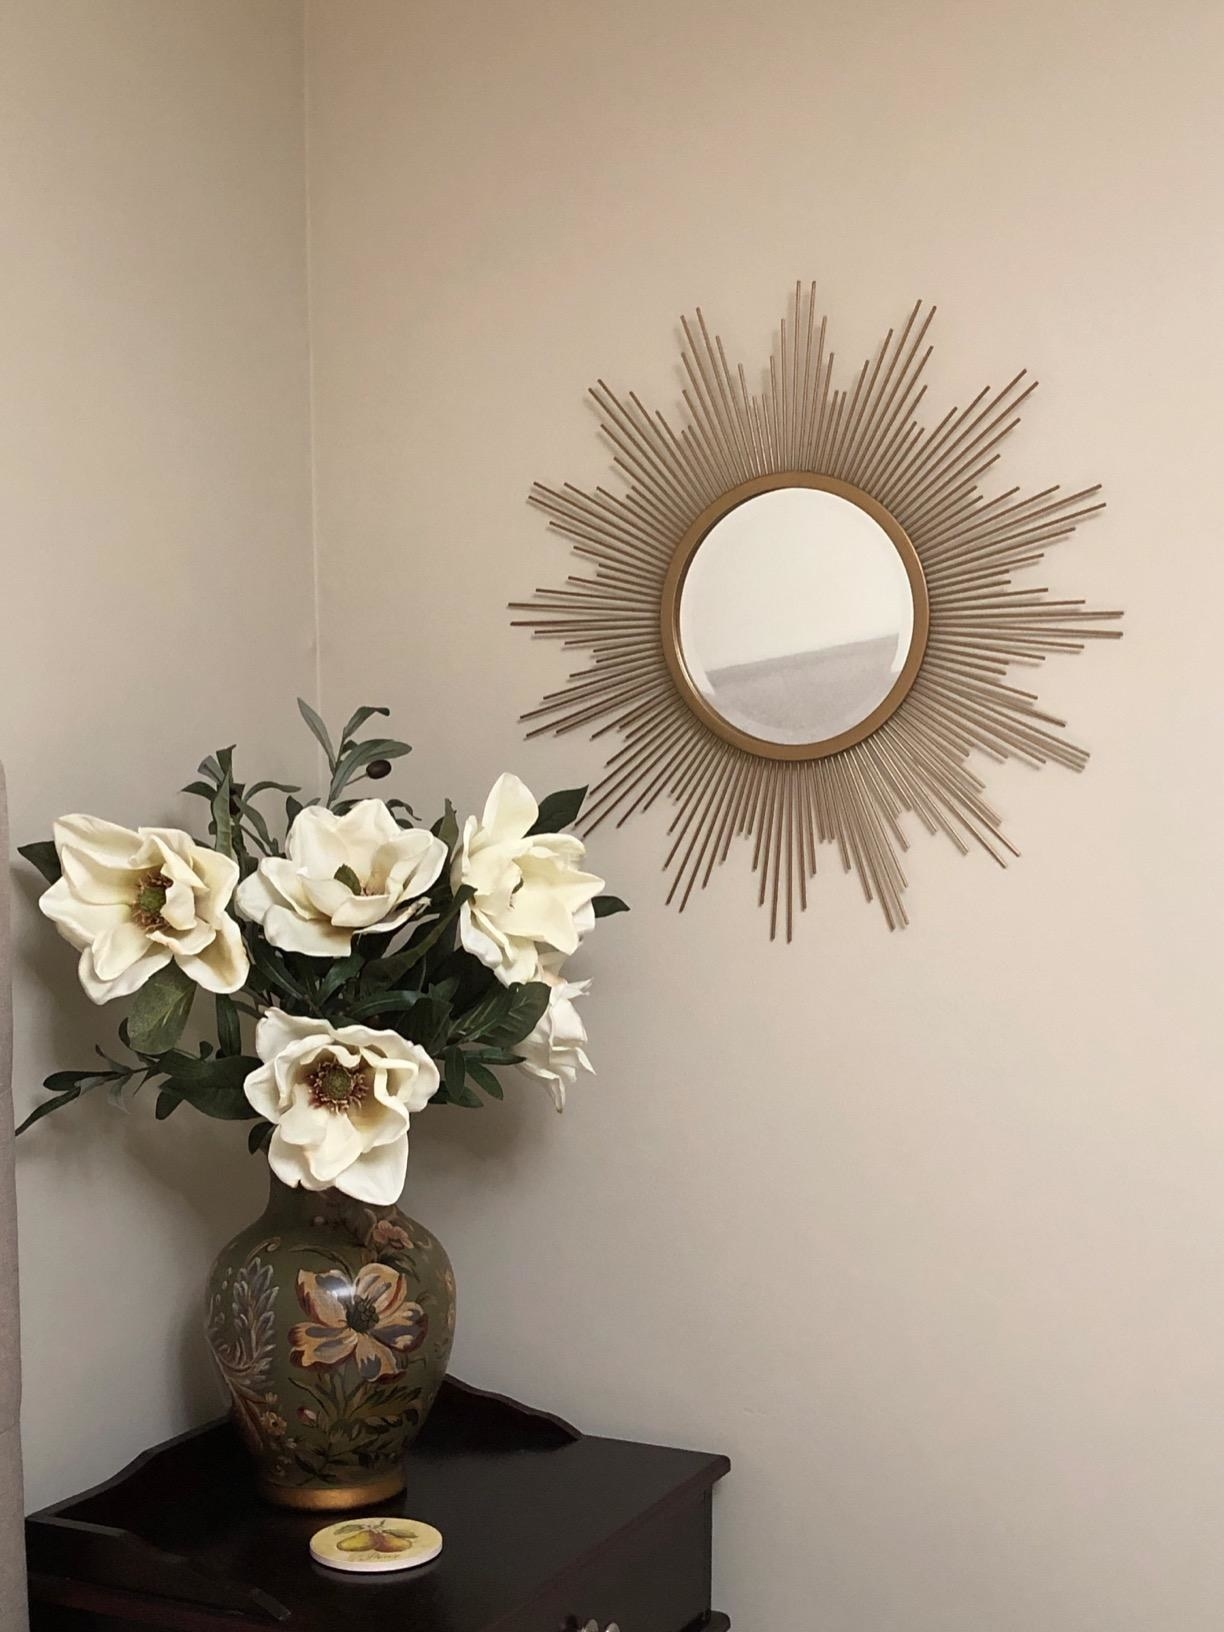 reviewer image of the stonebriar sunburst wall mirror mounted on a wall above a vase full of flowers